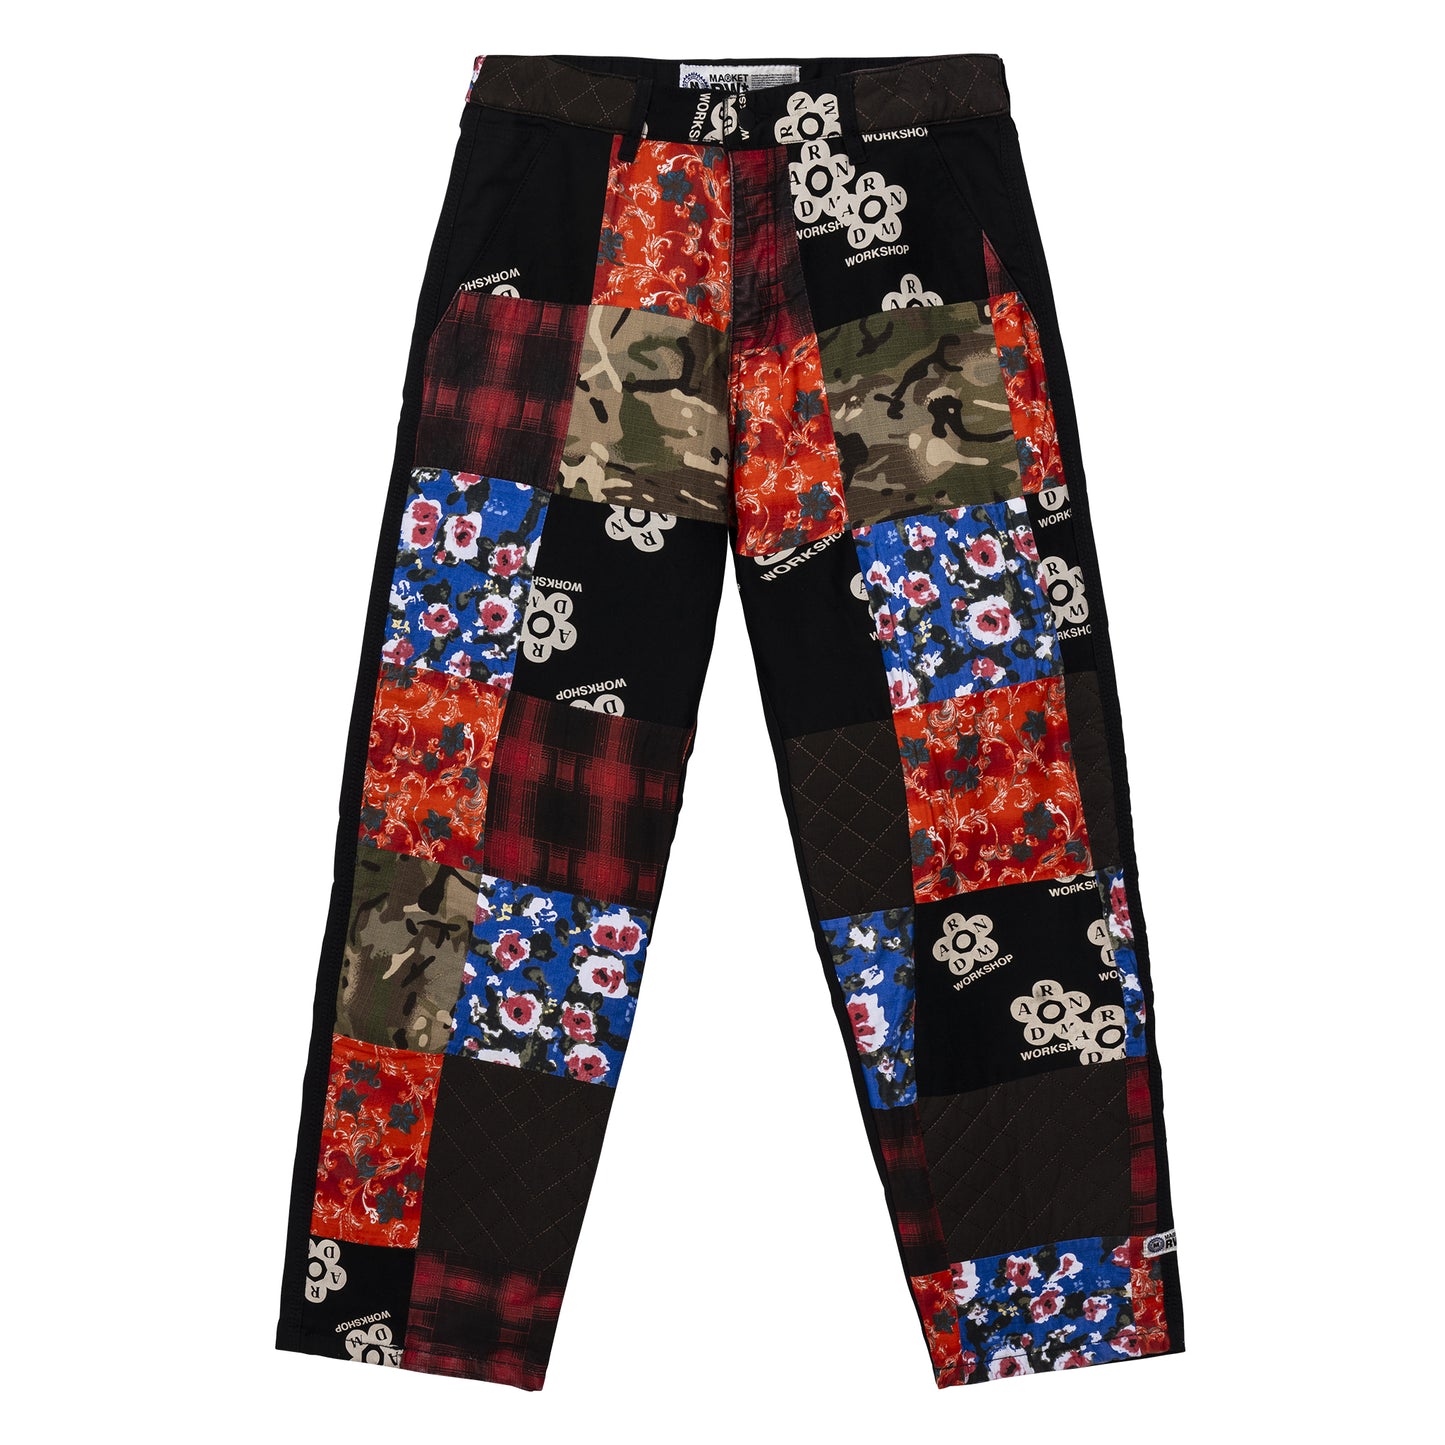 RW COLORADO QUILTED PANTS